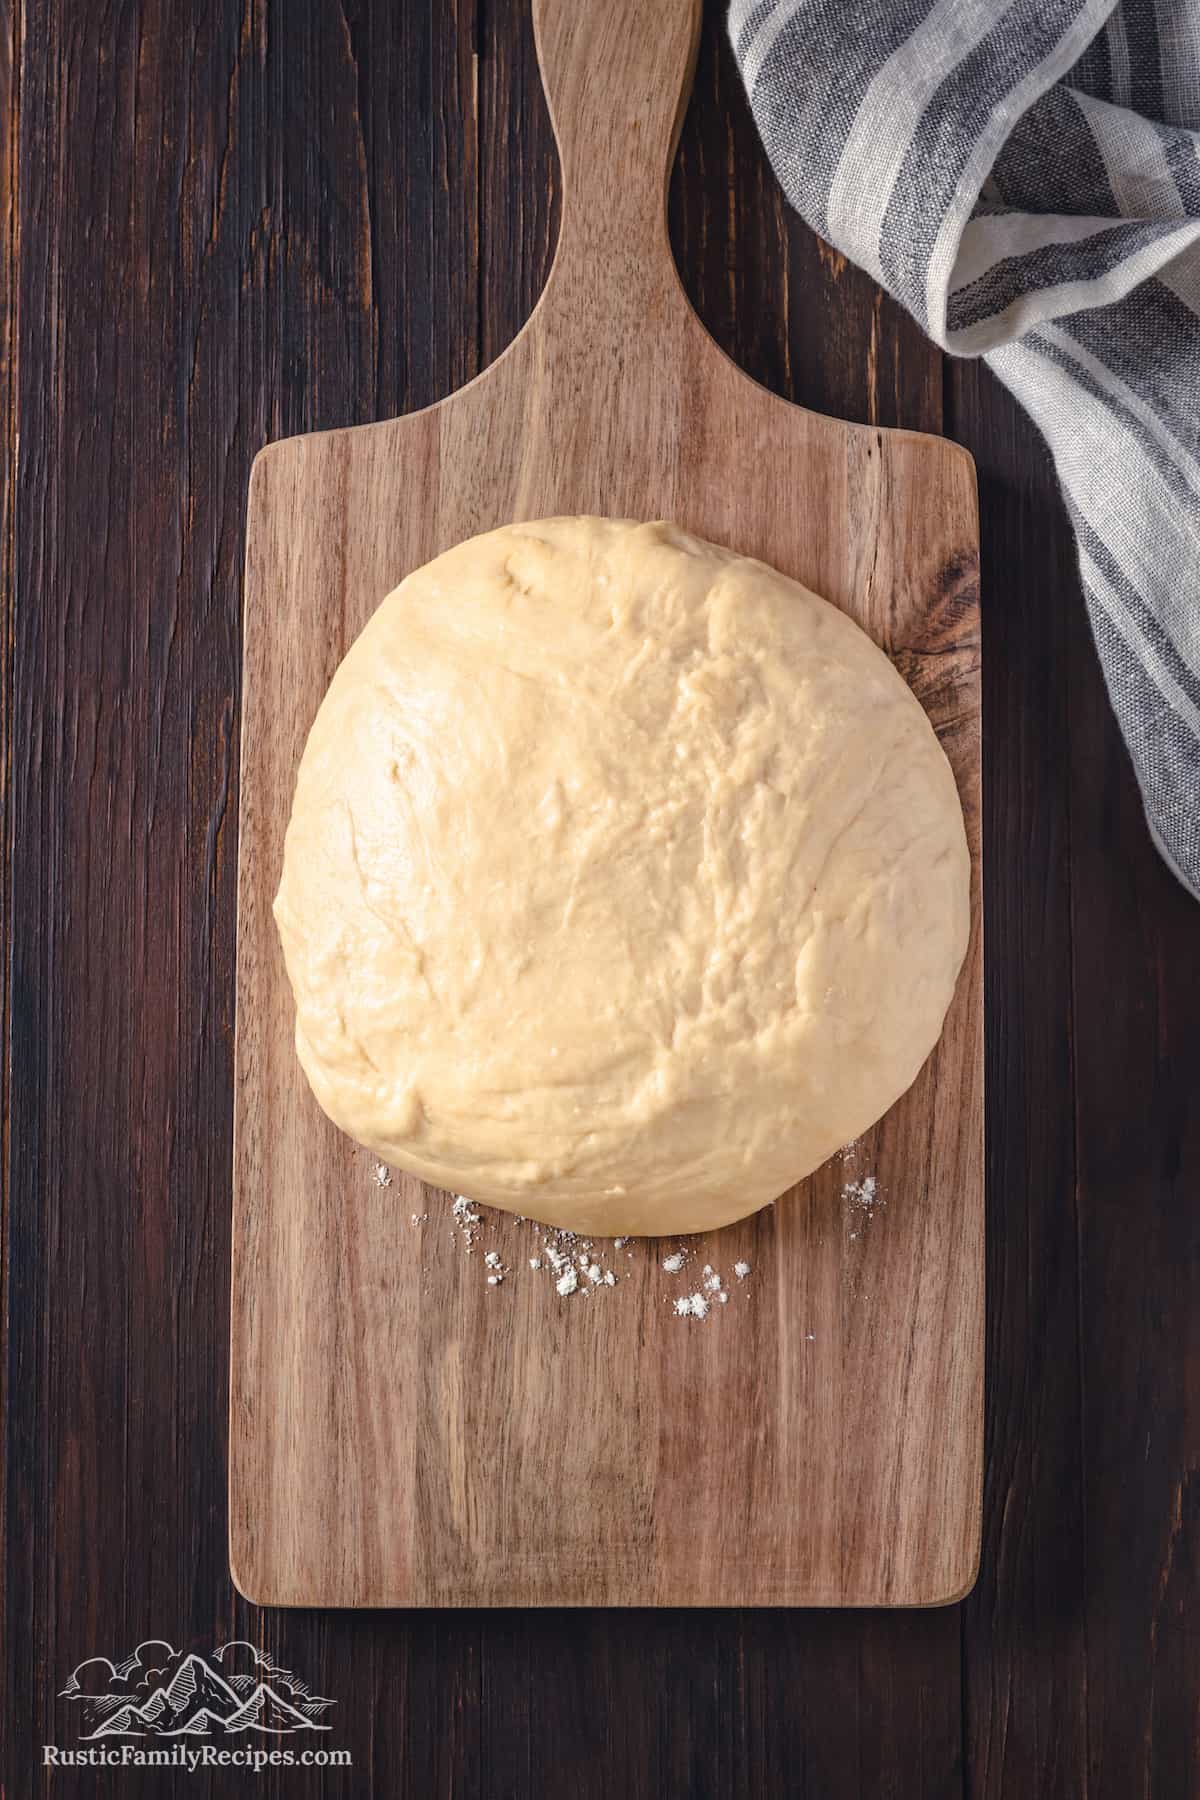 Top view of hojaldres dough on a wooden cutting board.